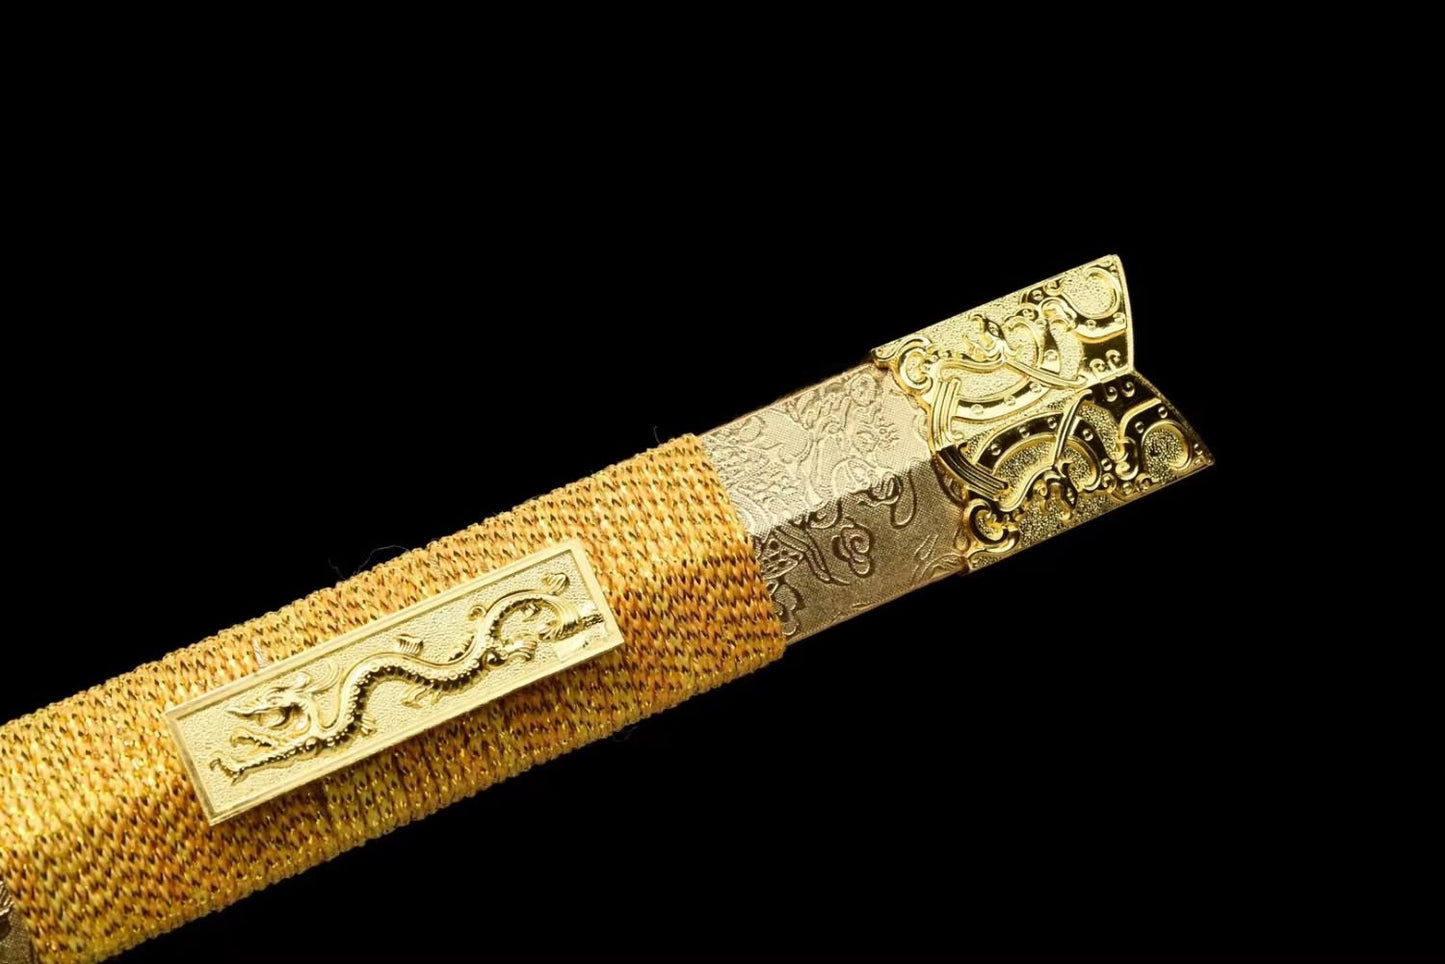 Han jian Sword-Forged High Manganese Steel Blade,Golden Appearance,Faux Leather Scabbard